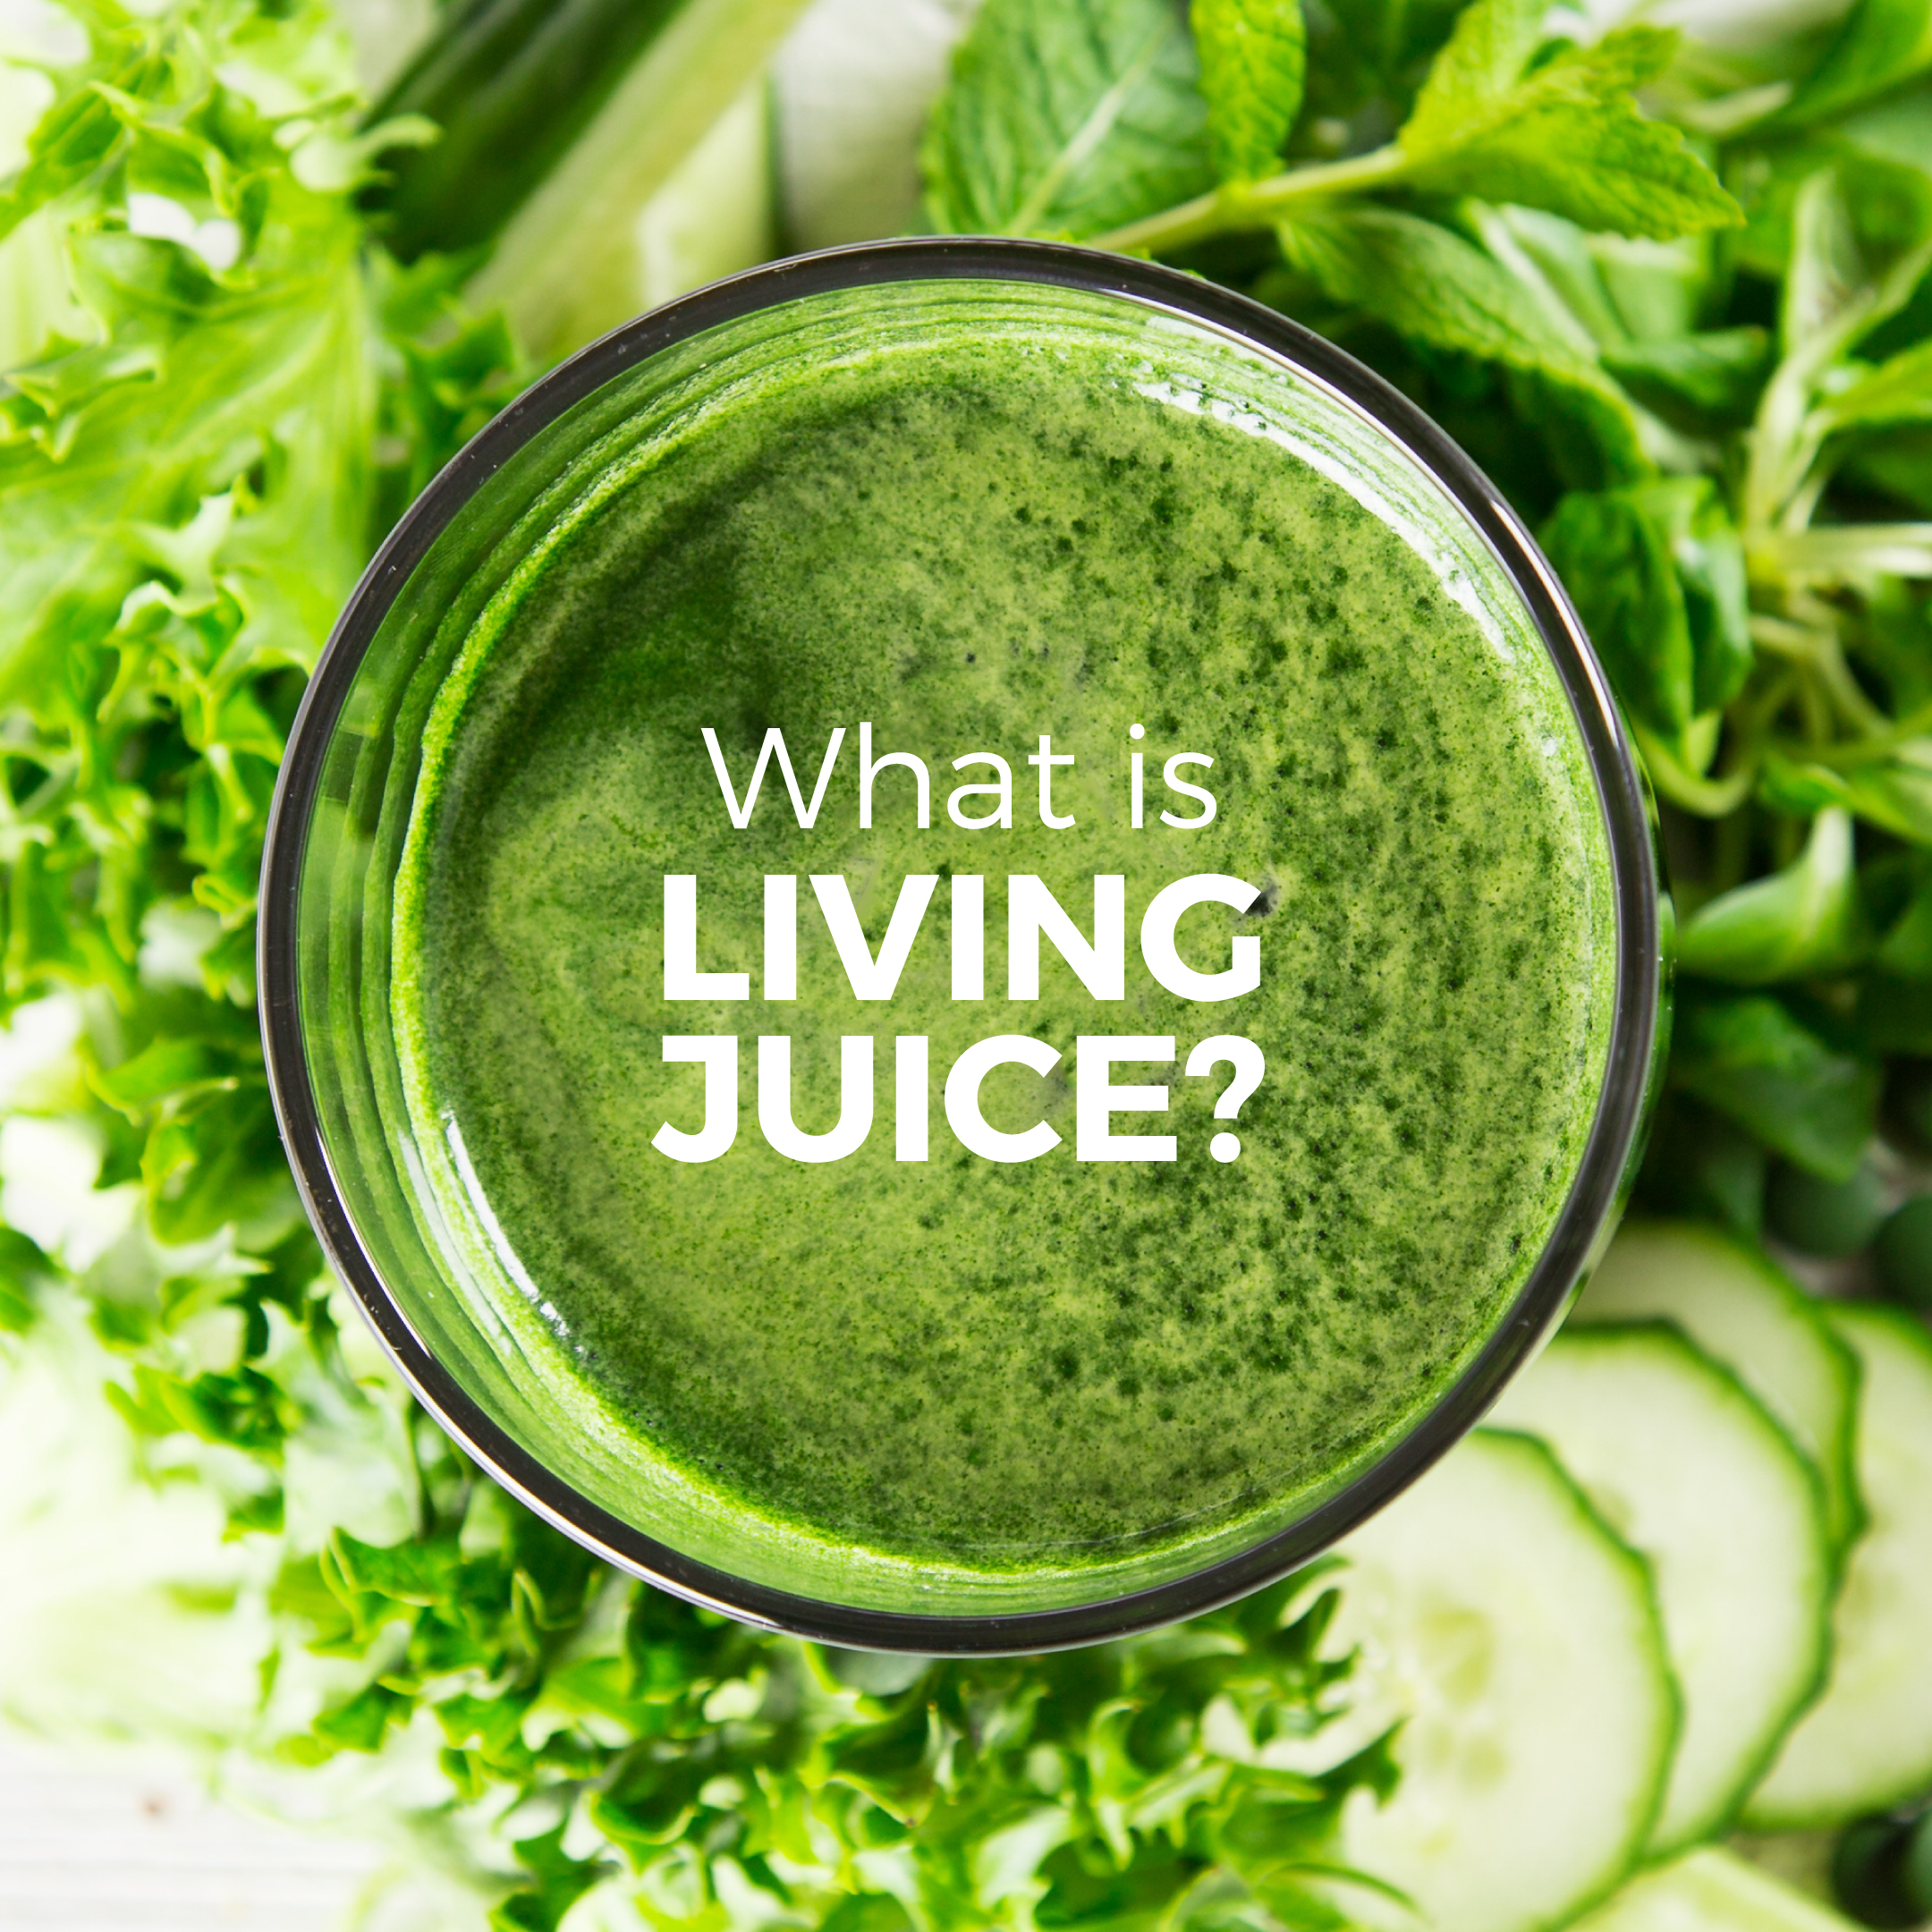 What is Living Juice?